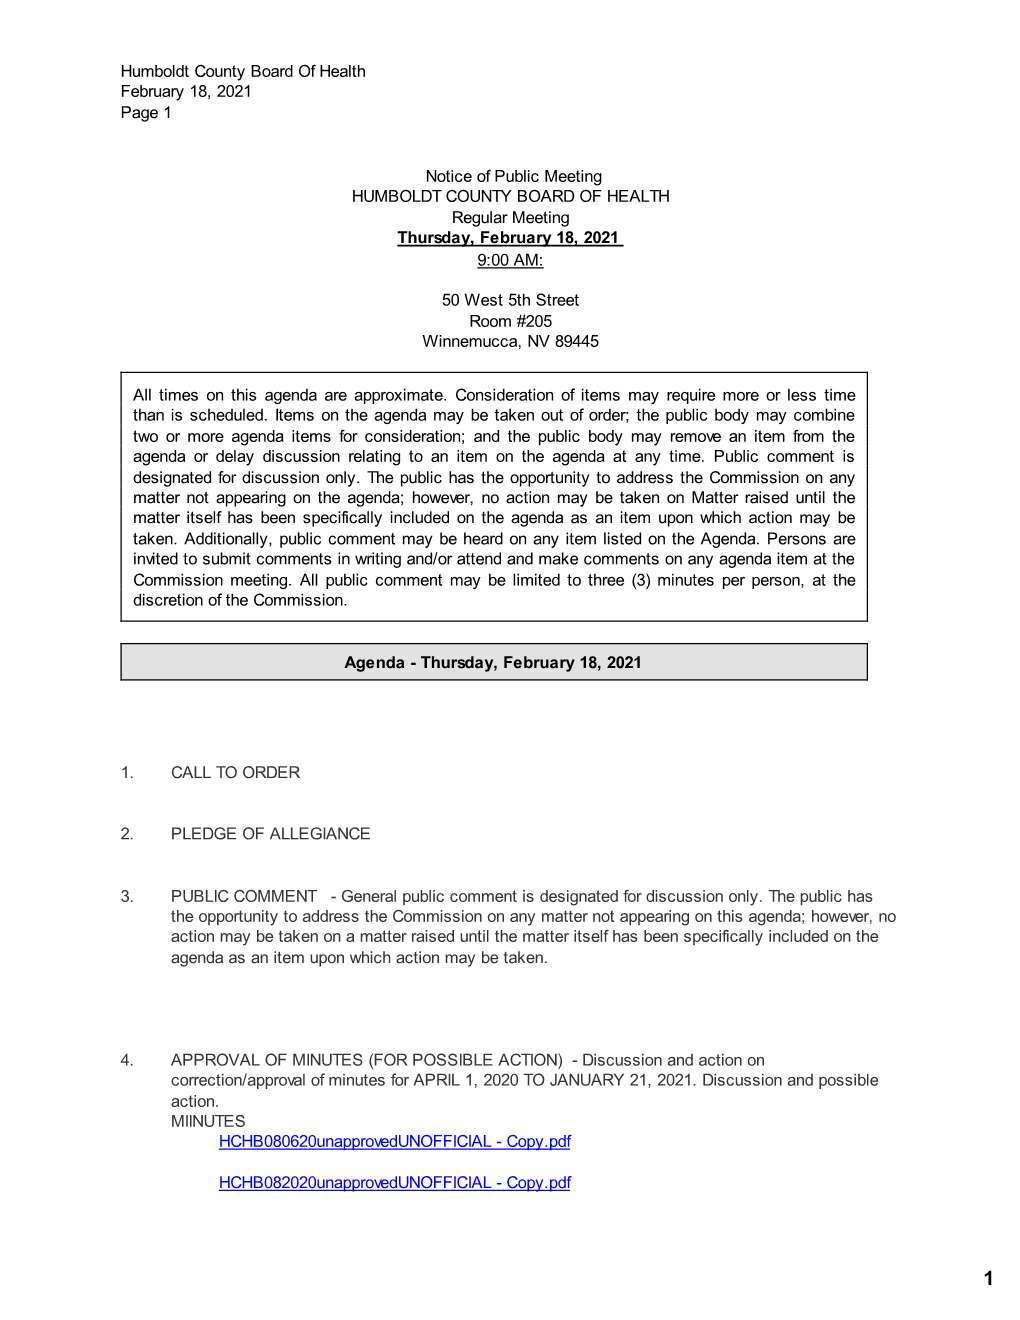 Humboldt County Board of Health February 18, 2021 Page 1 Notice Of